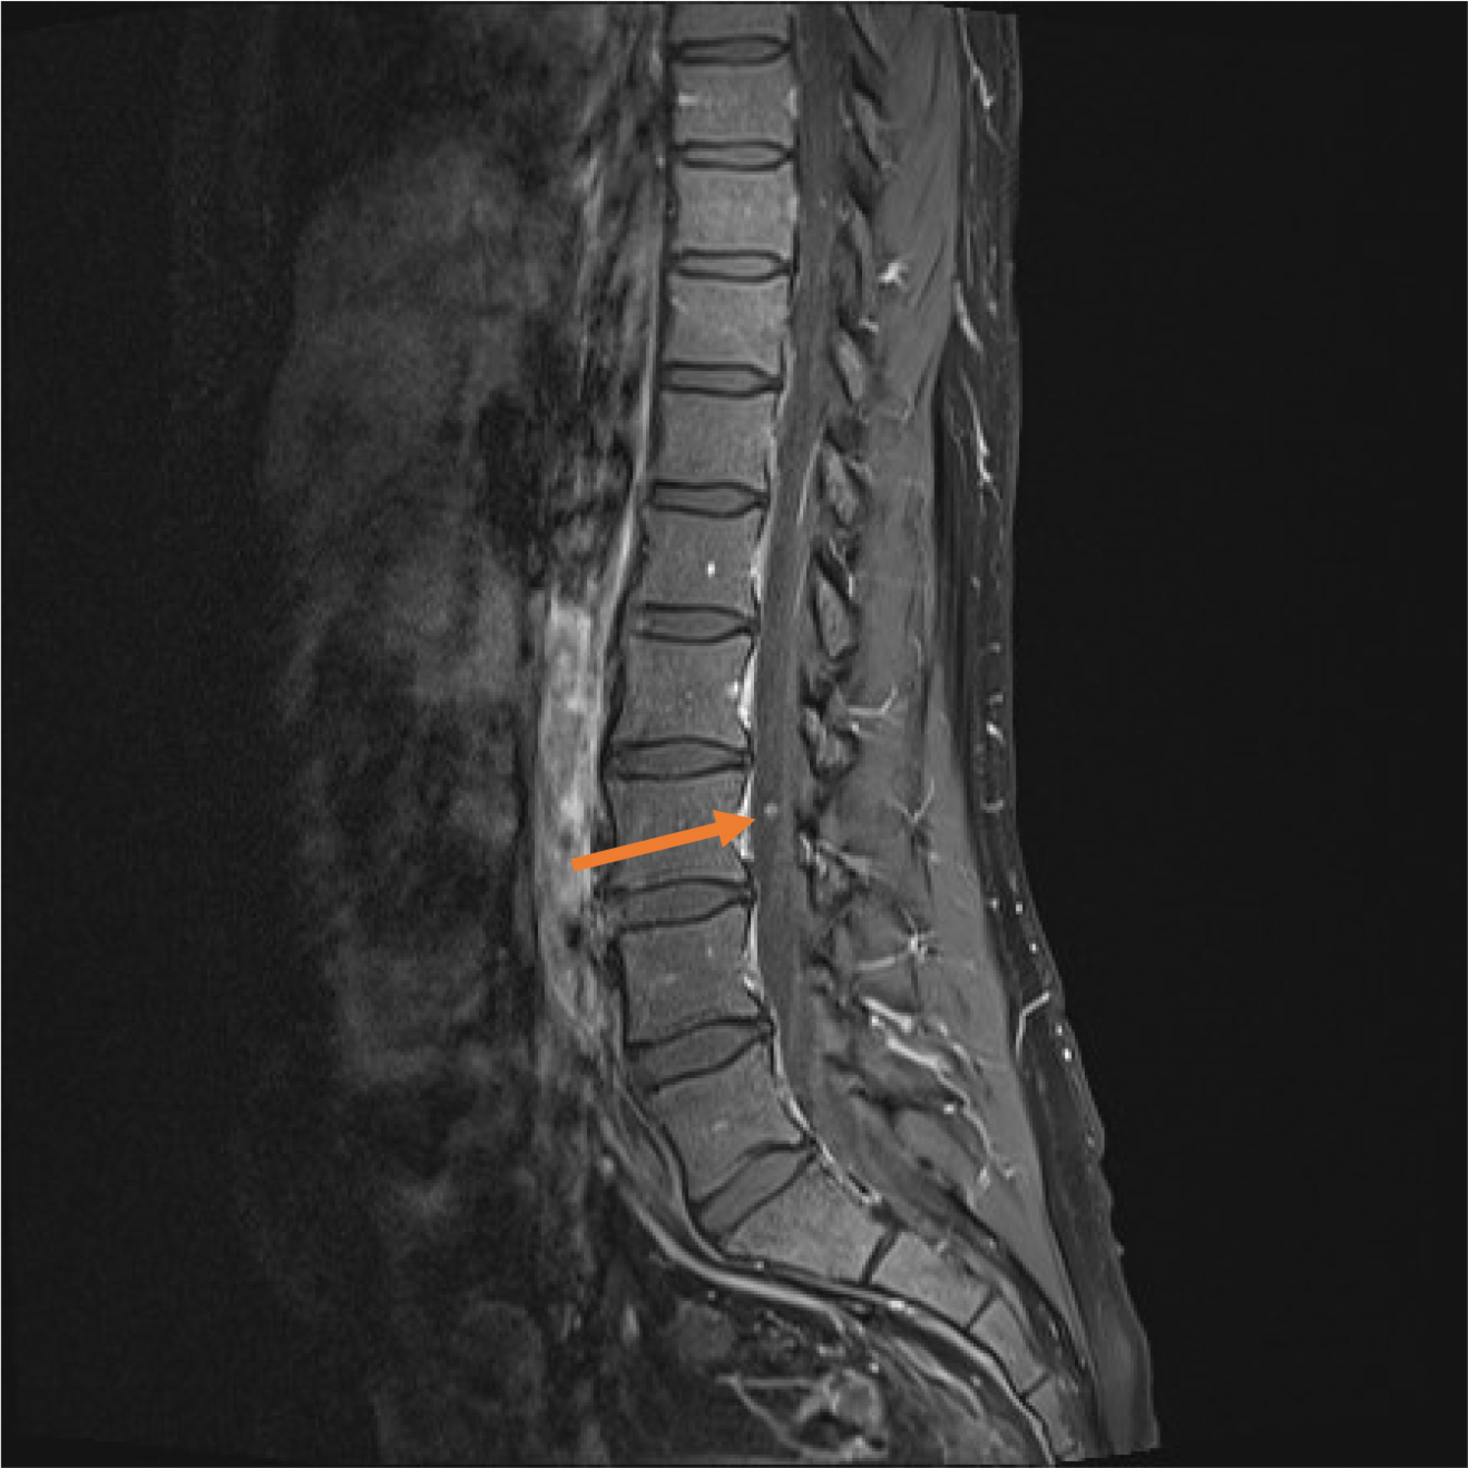 Color Mri Of The Abdomen Showing The Lumbar Spine Low Back From The Hot Sex Picture